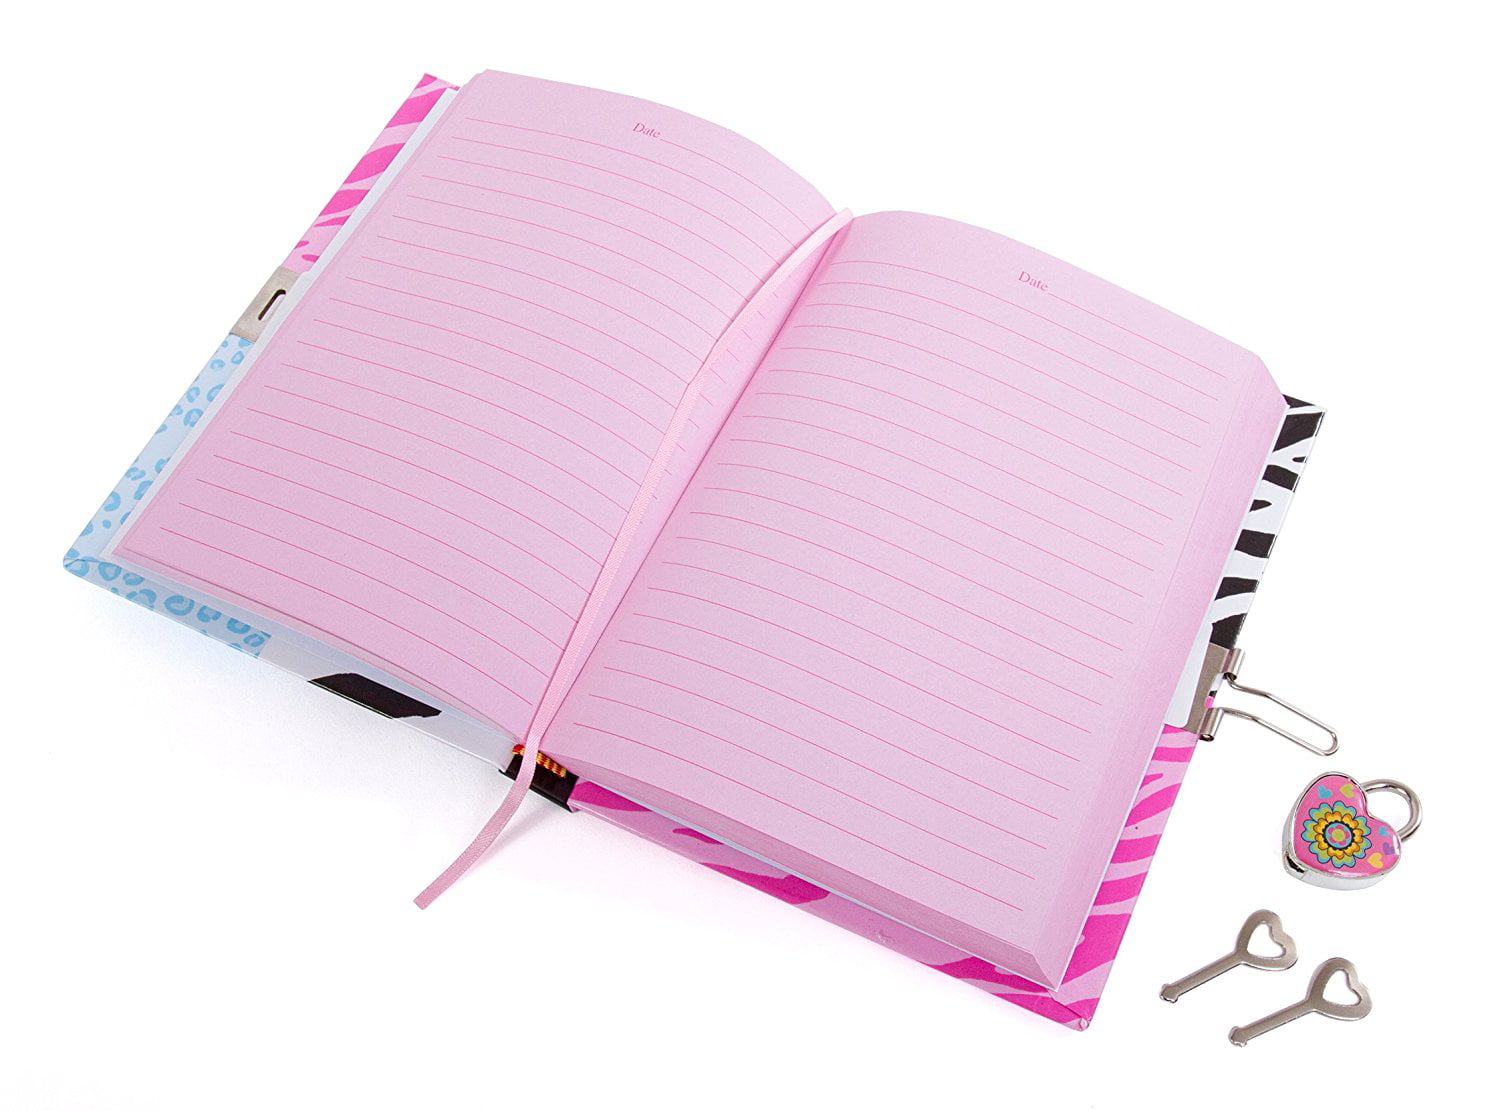 Girls Secret Diary with Lock Notebook 300 Pages Journal Padlock 2 Keys for Kids